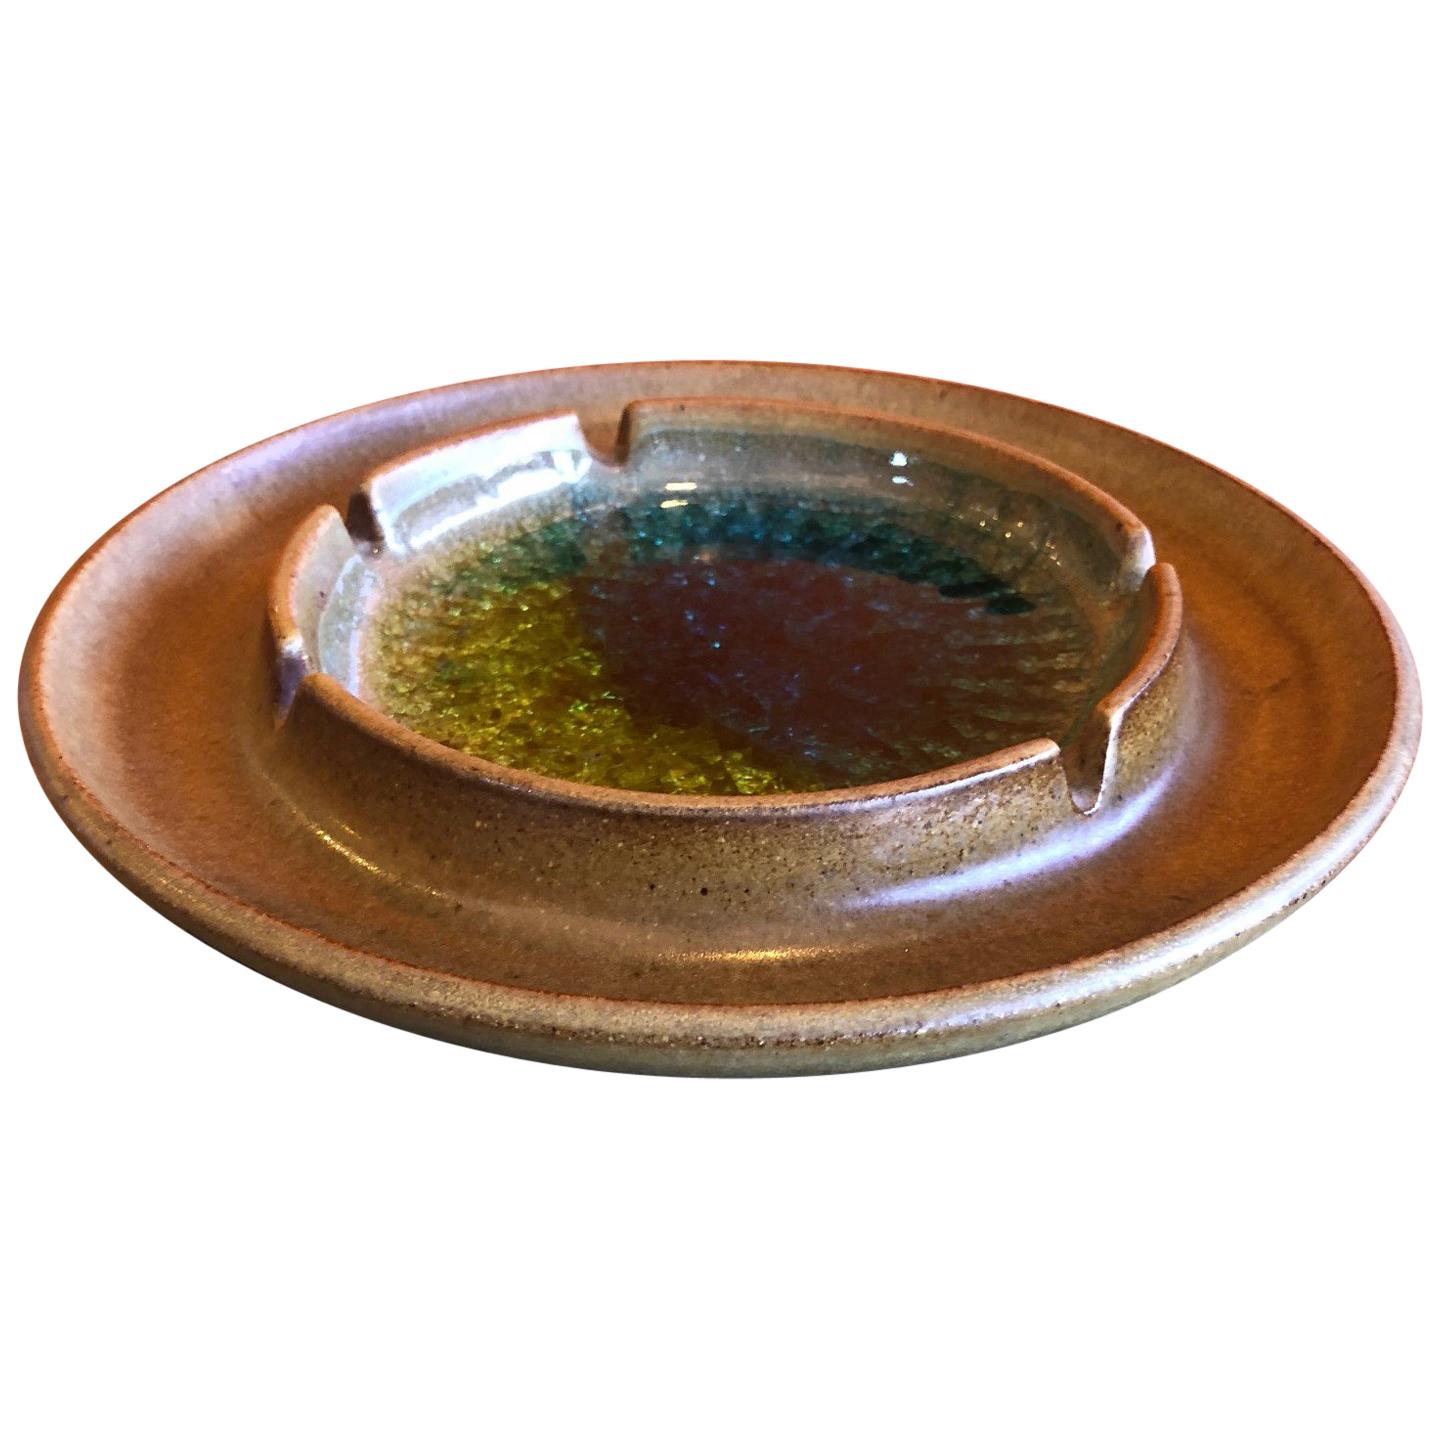 Earthenware and Crackled Glass Ashtray by Robert Maxwell